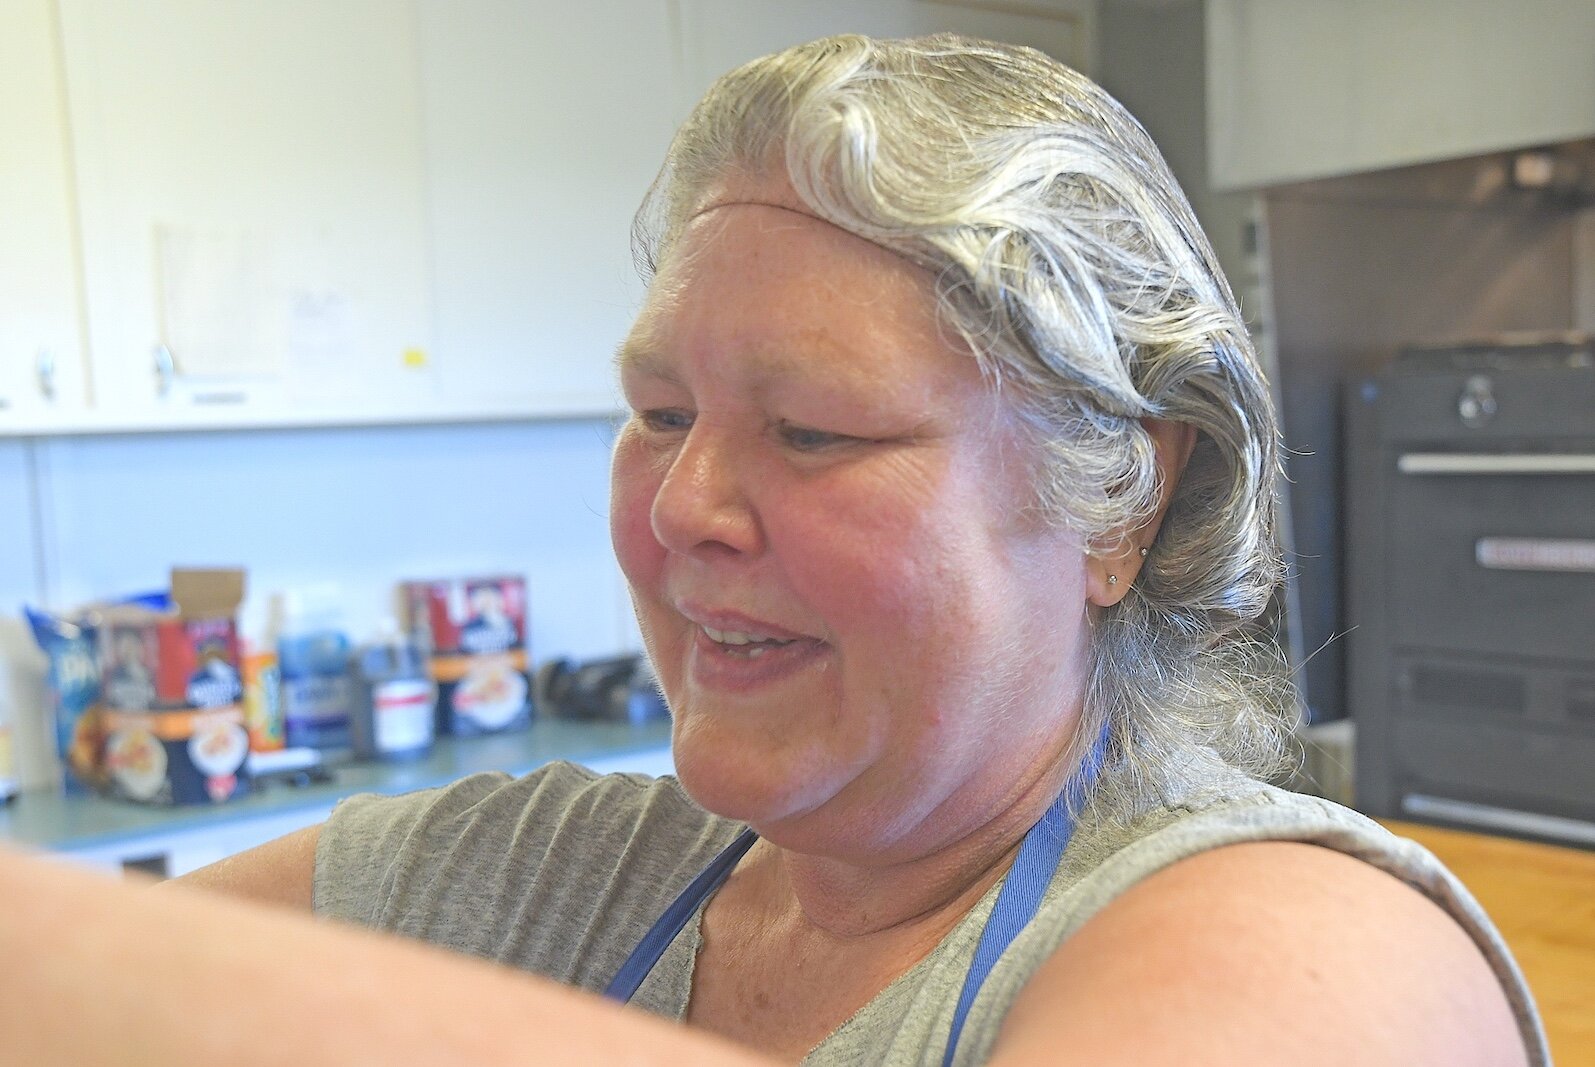 Mary Bourgeois, a member at St. Thomas Episcopal Church, is a volunteer for their breakfast program.